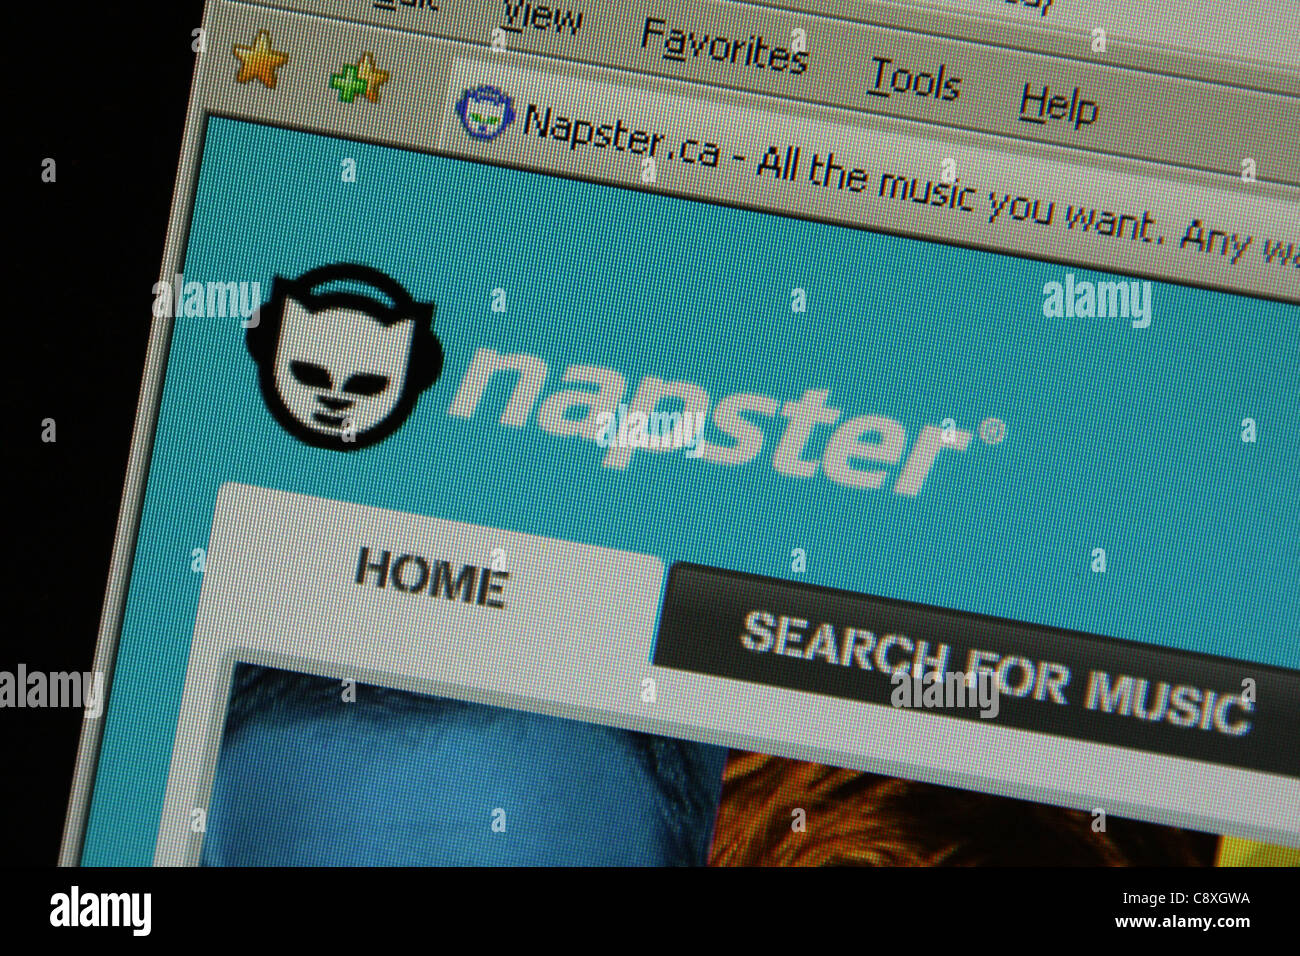 napster download music online Stock Photo - Alamy